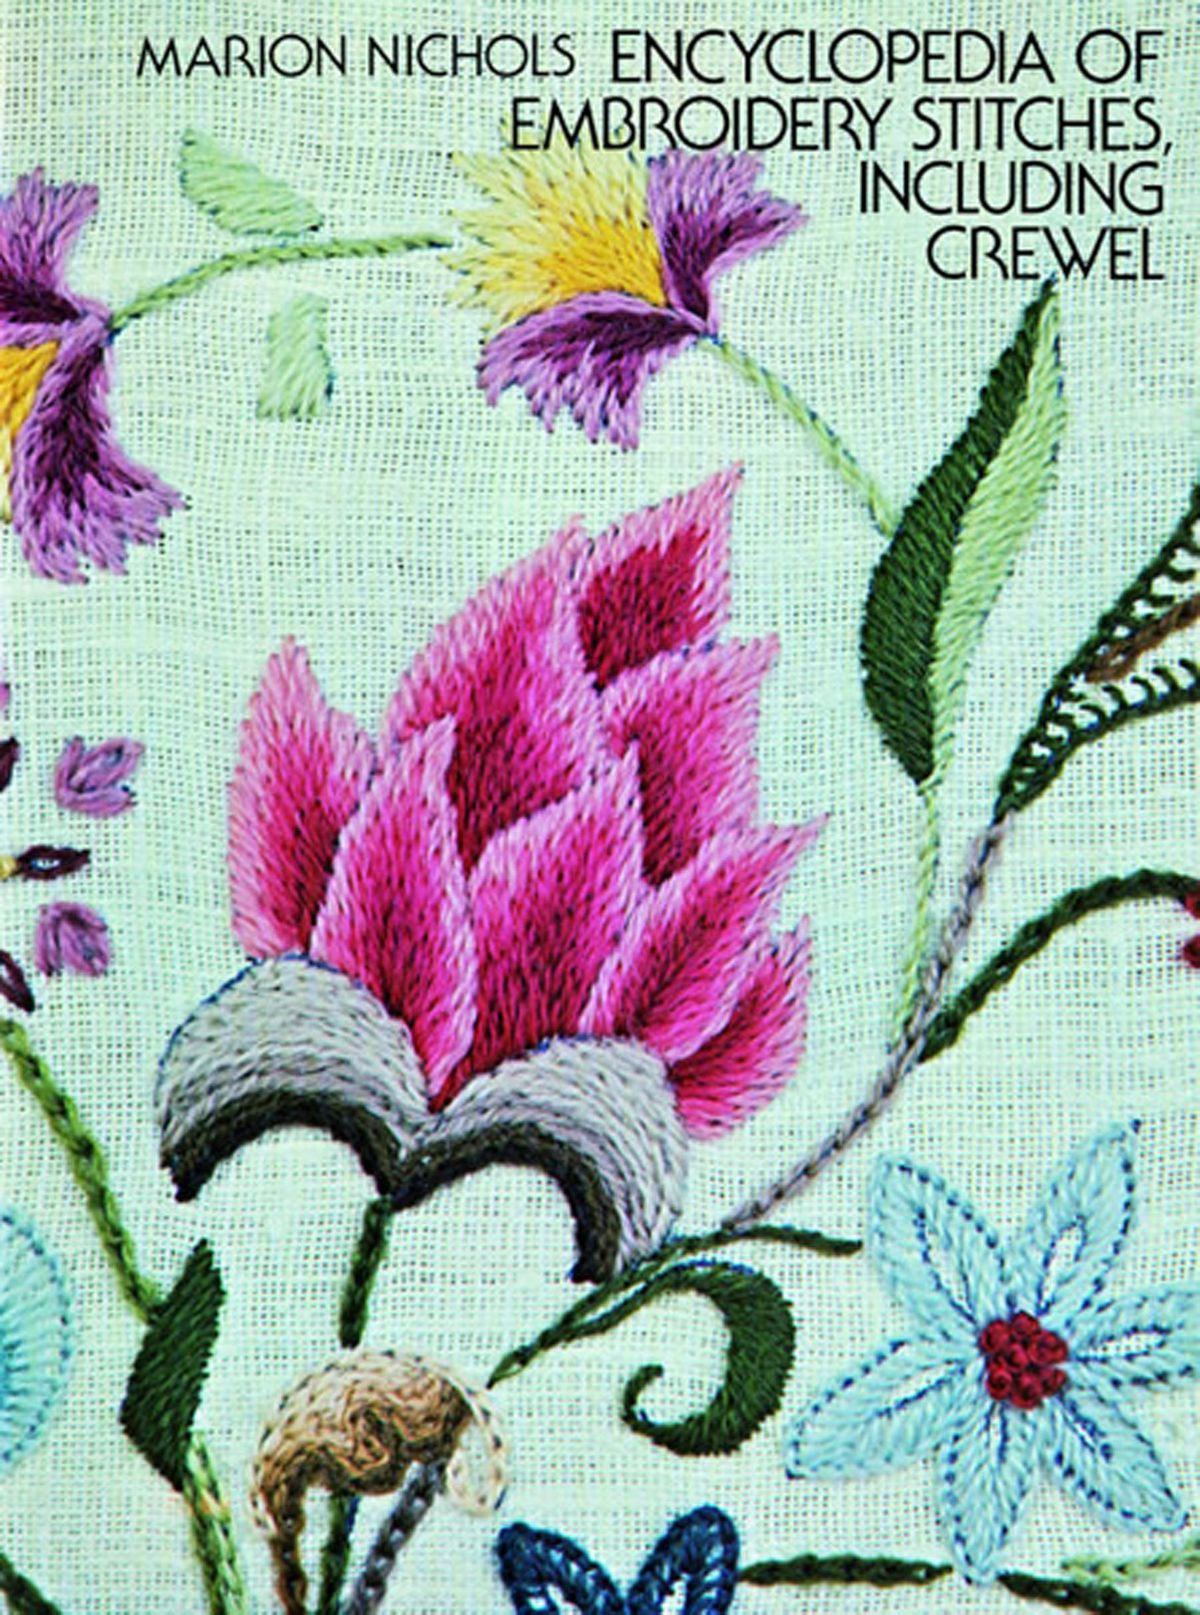 Crewel Embroidery Patterns Encyclopedia Of Embroidery Stitches Including Crewel Ebook Marion Nichols Rakuten Kobo